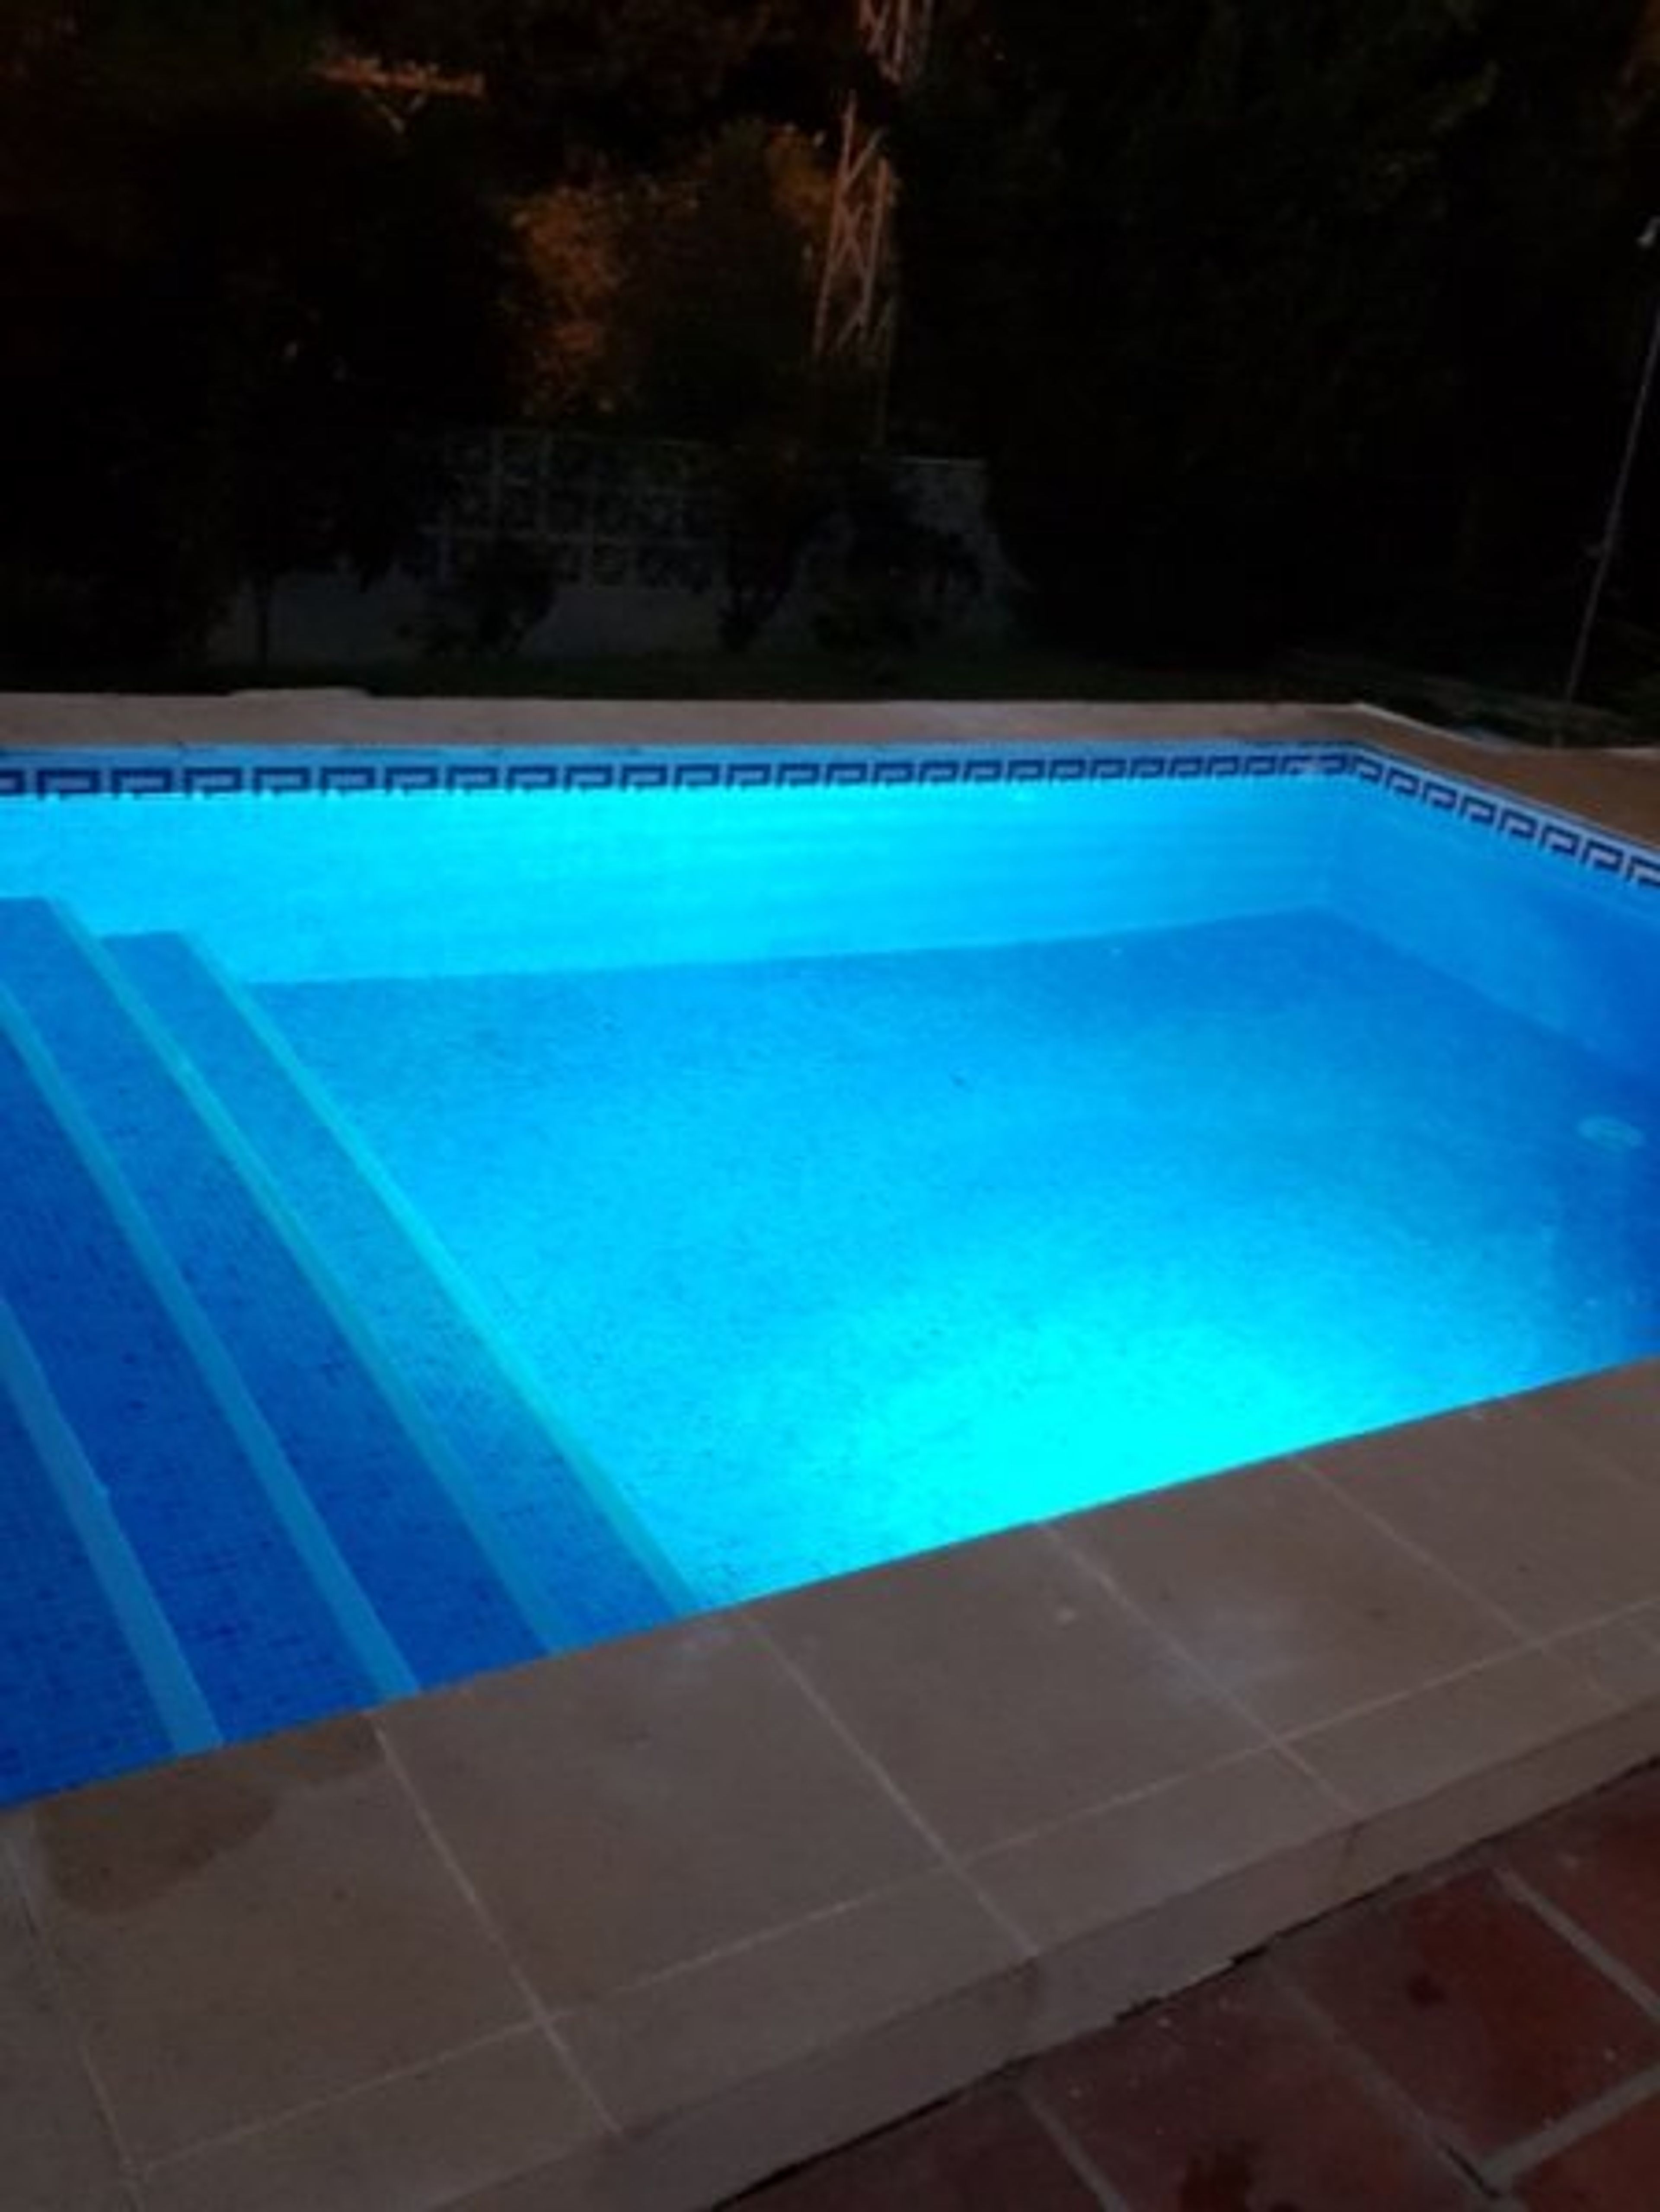 Heated pool with lighting perfect for a night time swim 